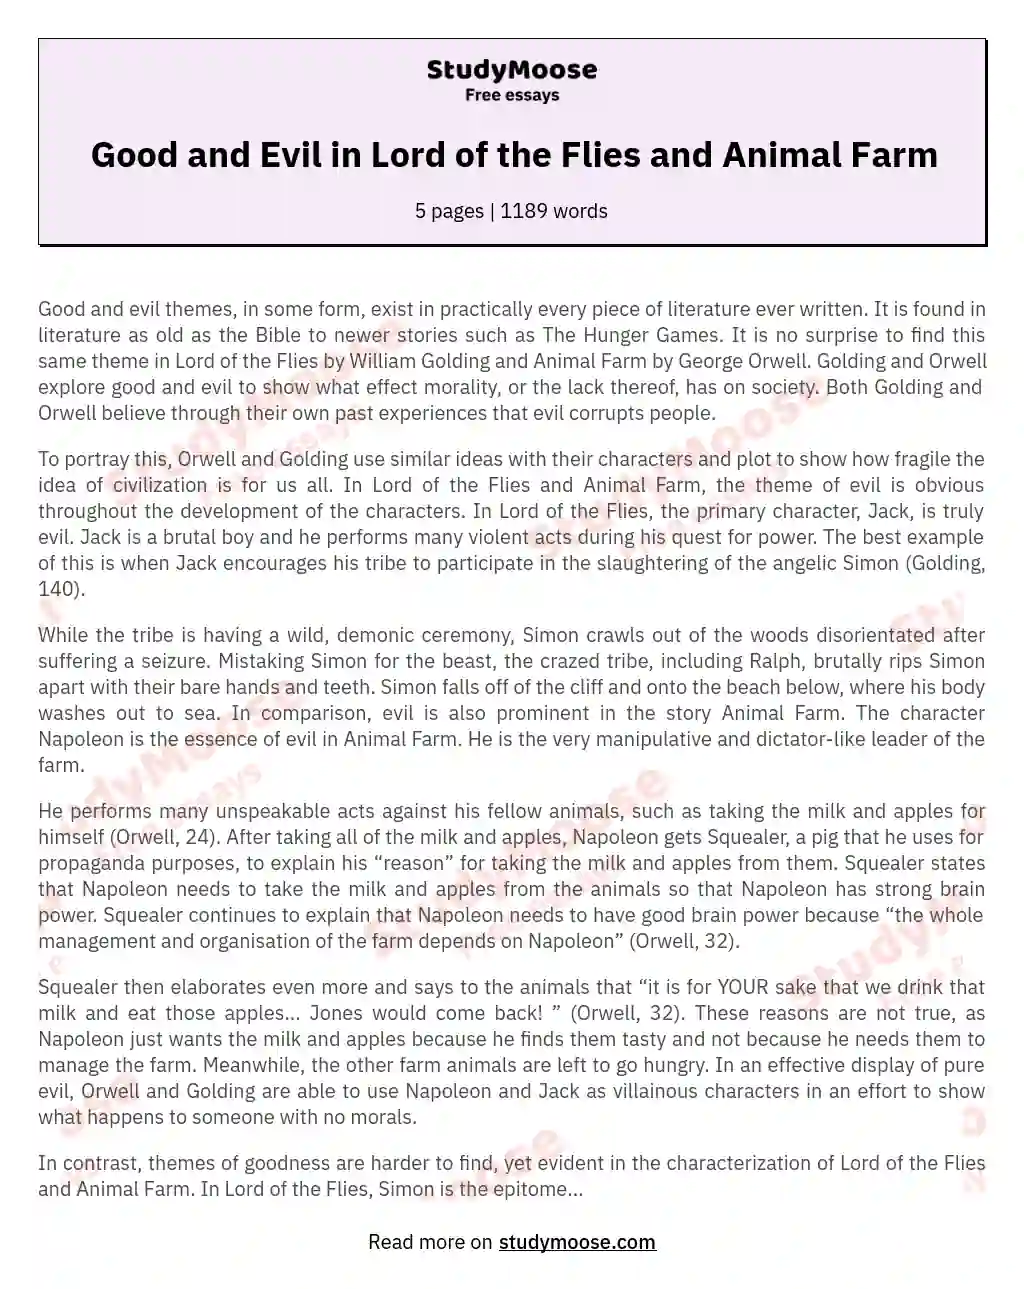 Good and Evil in Lord of the Flies and Animal Farm